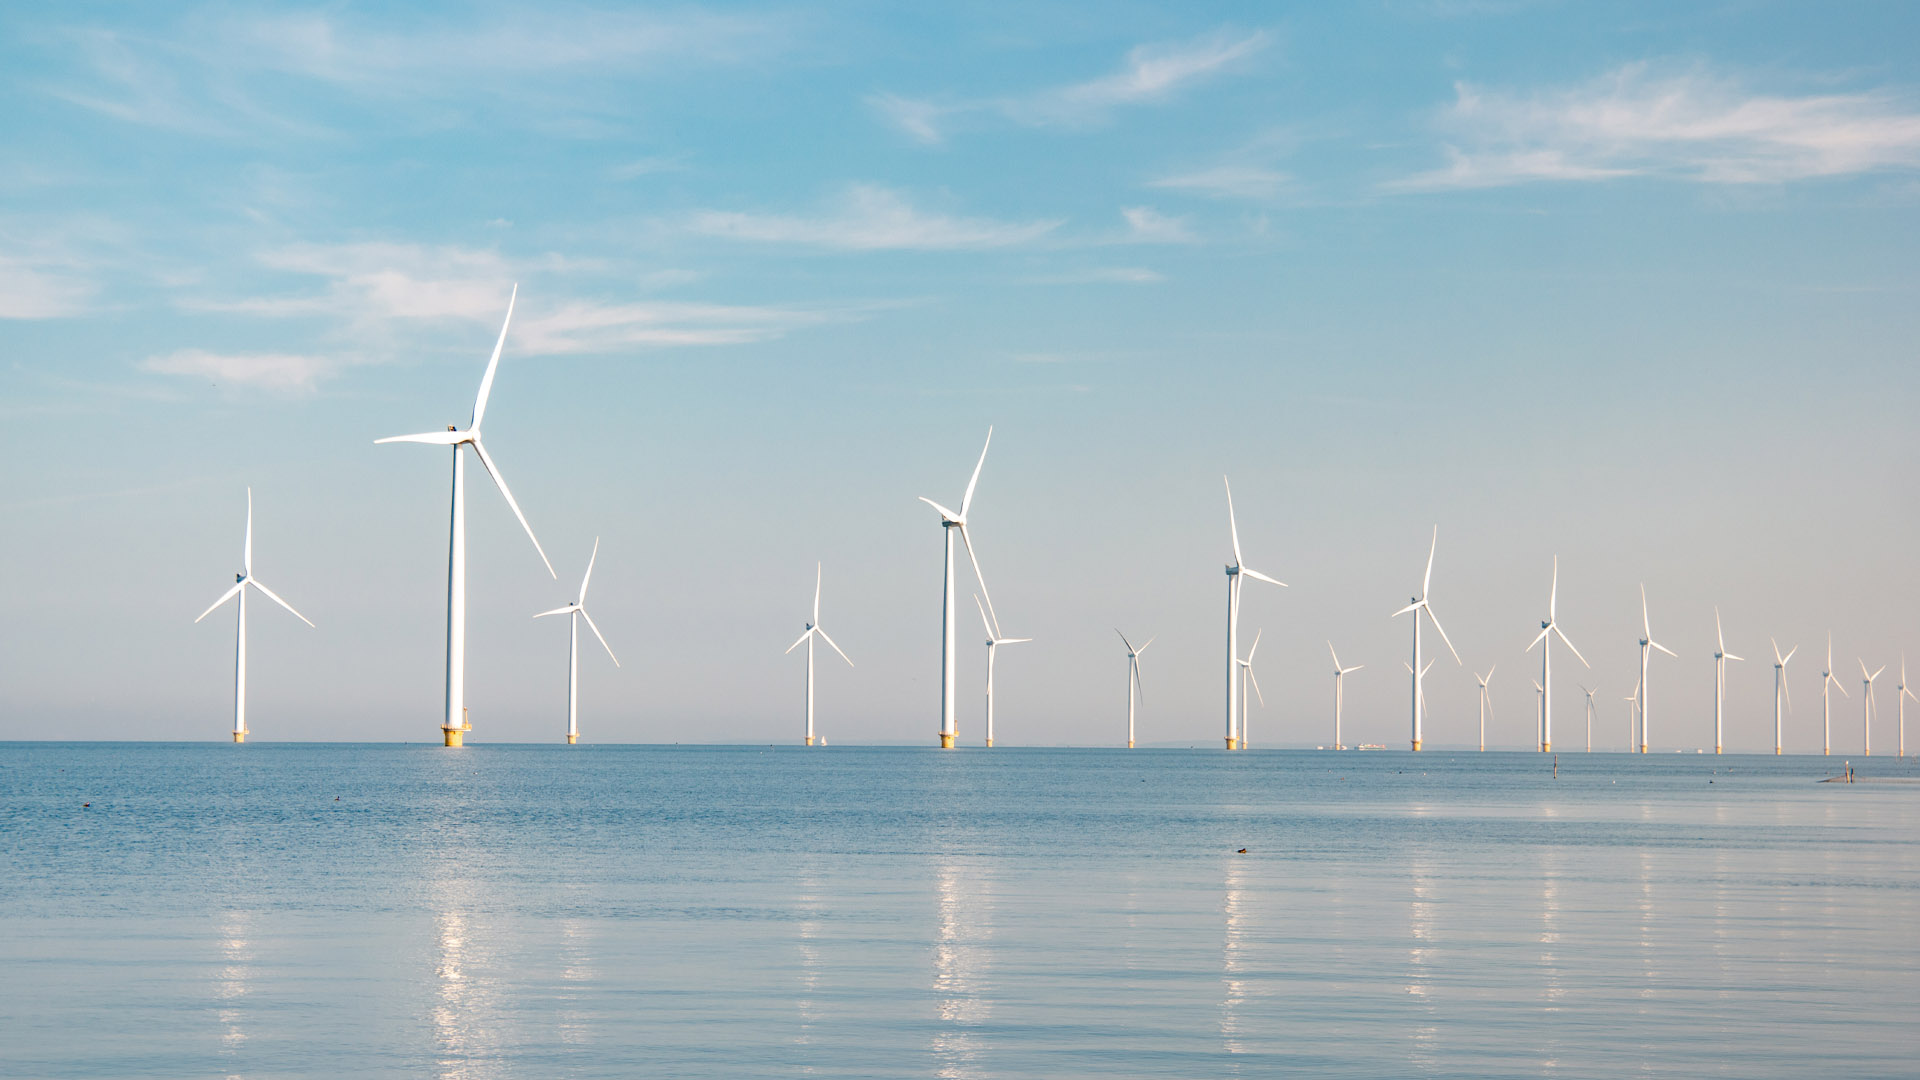 Canada's offshore winds could power Eastern Canada